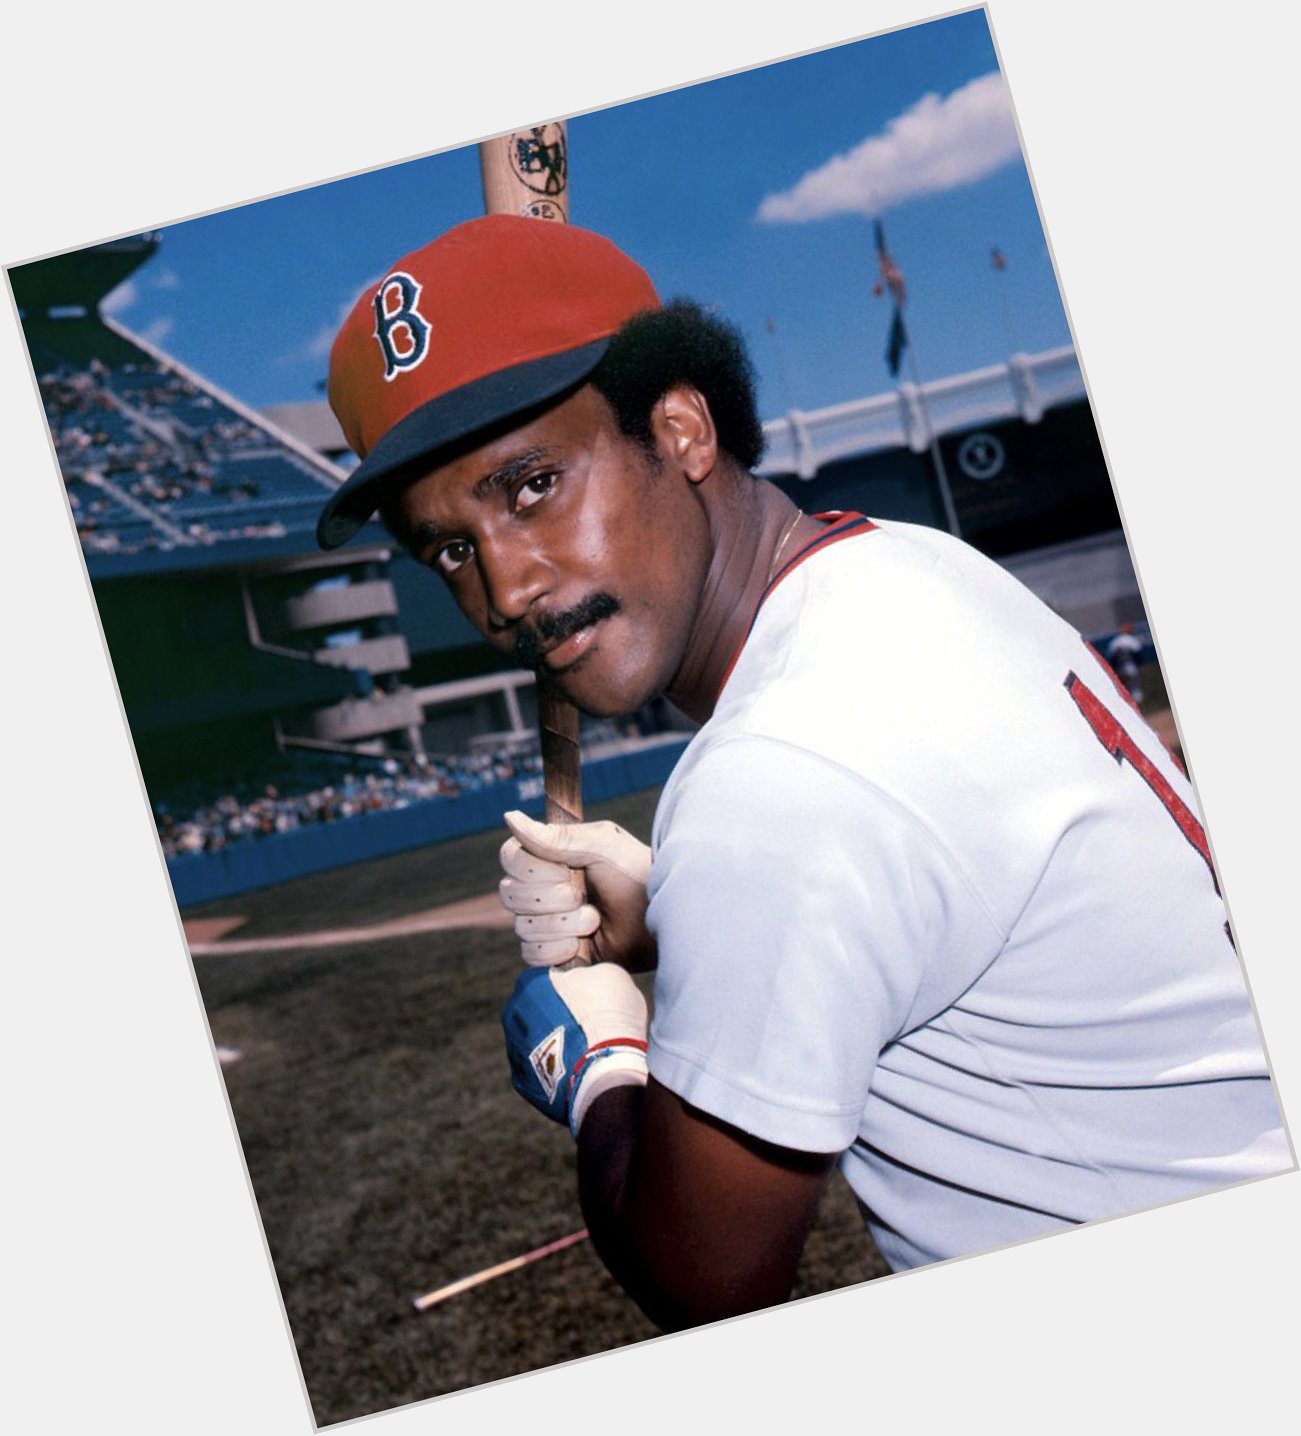 Happy 69th birthday to the great Jim Rice.  Actually played pepper with him once at Fenway.  Love this guy. 